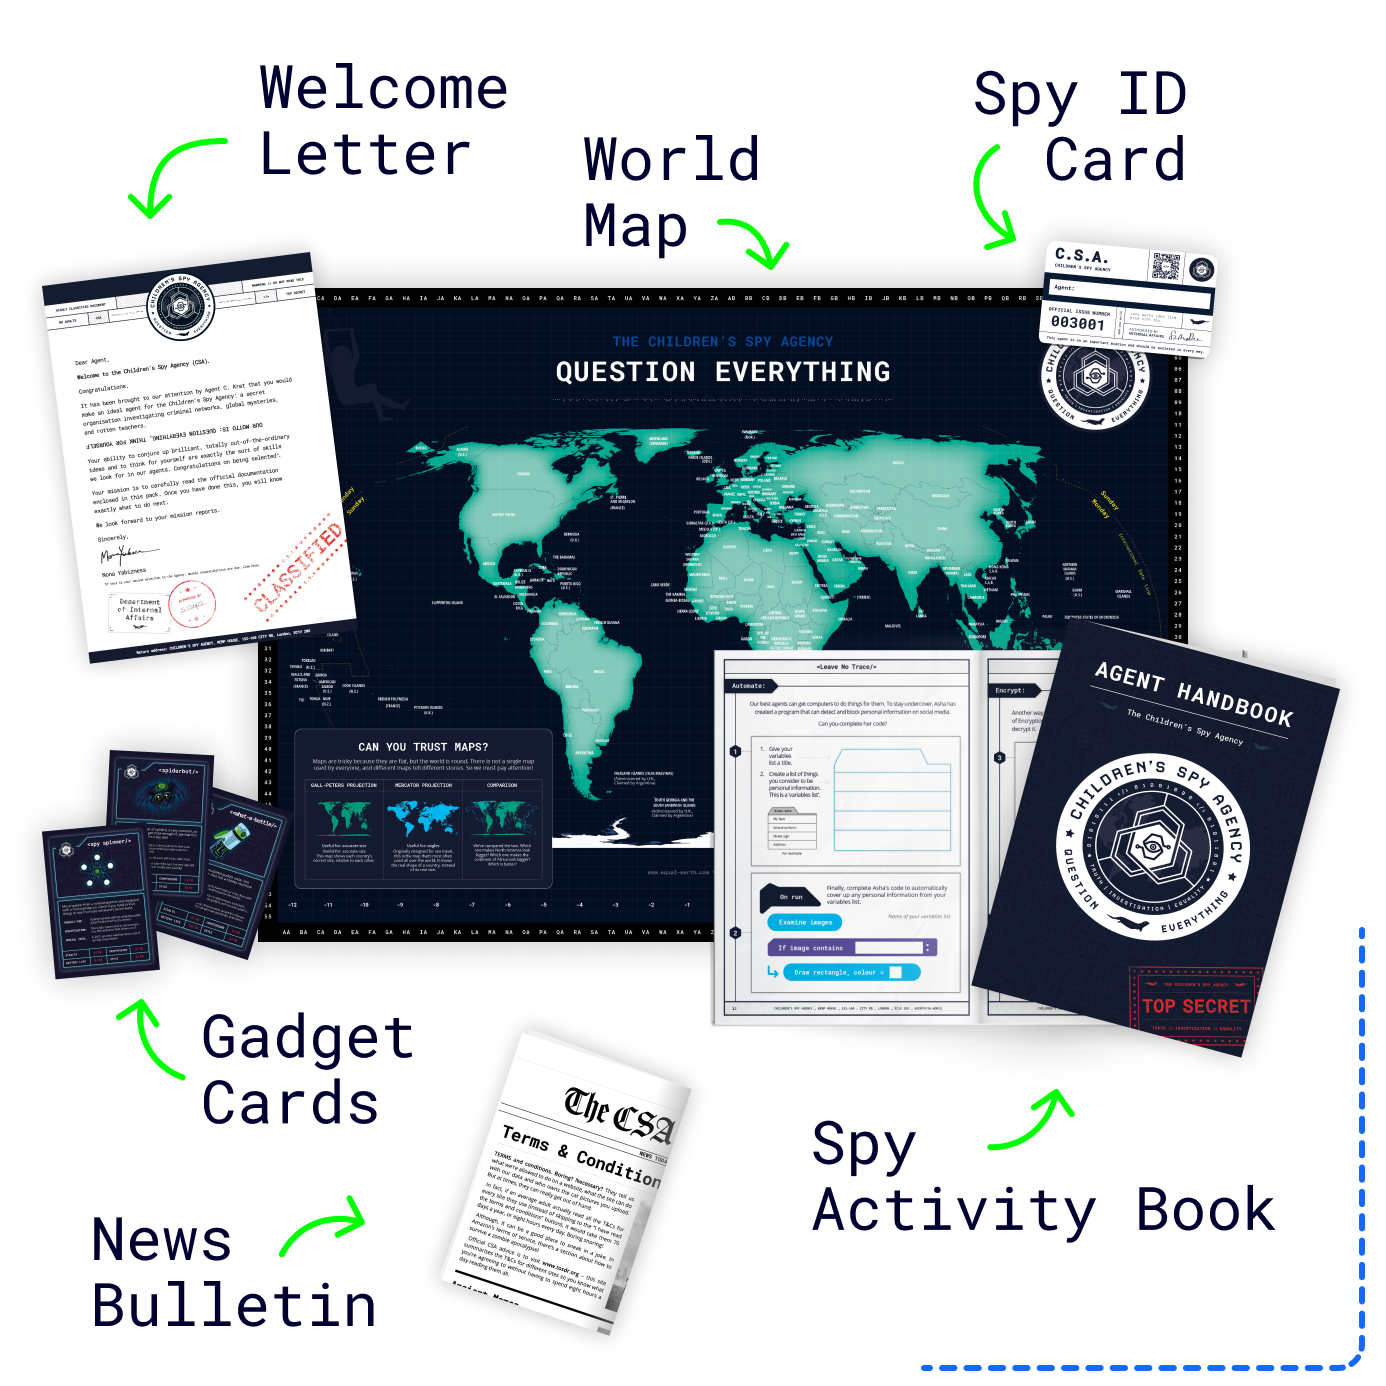 Mapped to the UK coding curriculum and recommended by the Good Toy Guide and Kidsafe, our books, games, and gifts bring STEM learning to life. Get the ultimate spy experience. Offline and online computer science learning. Kids 7-11 🌍  Ships worldwide 💛 Ethically made in the UK ♻️ Plastic-free + recyclable